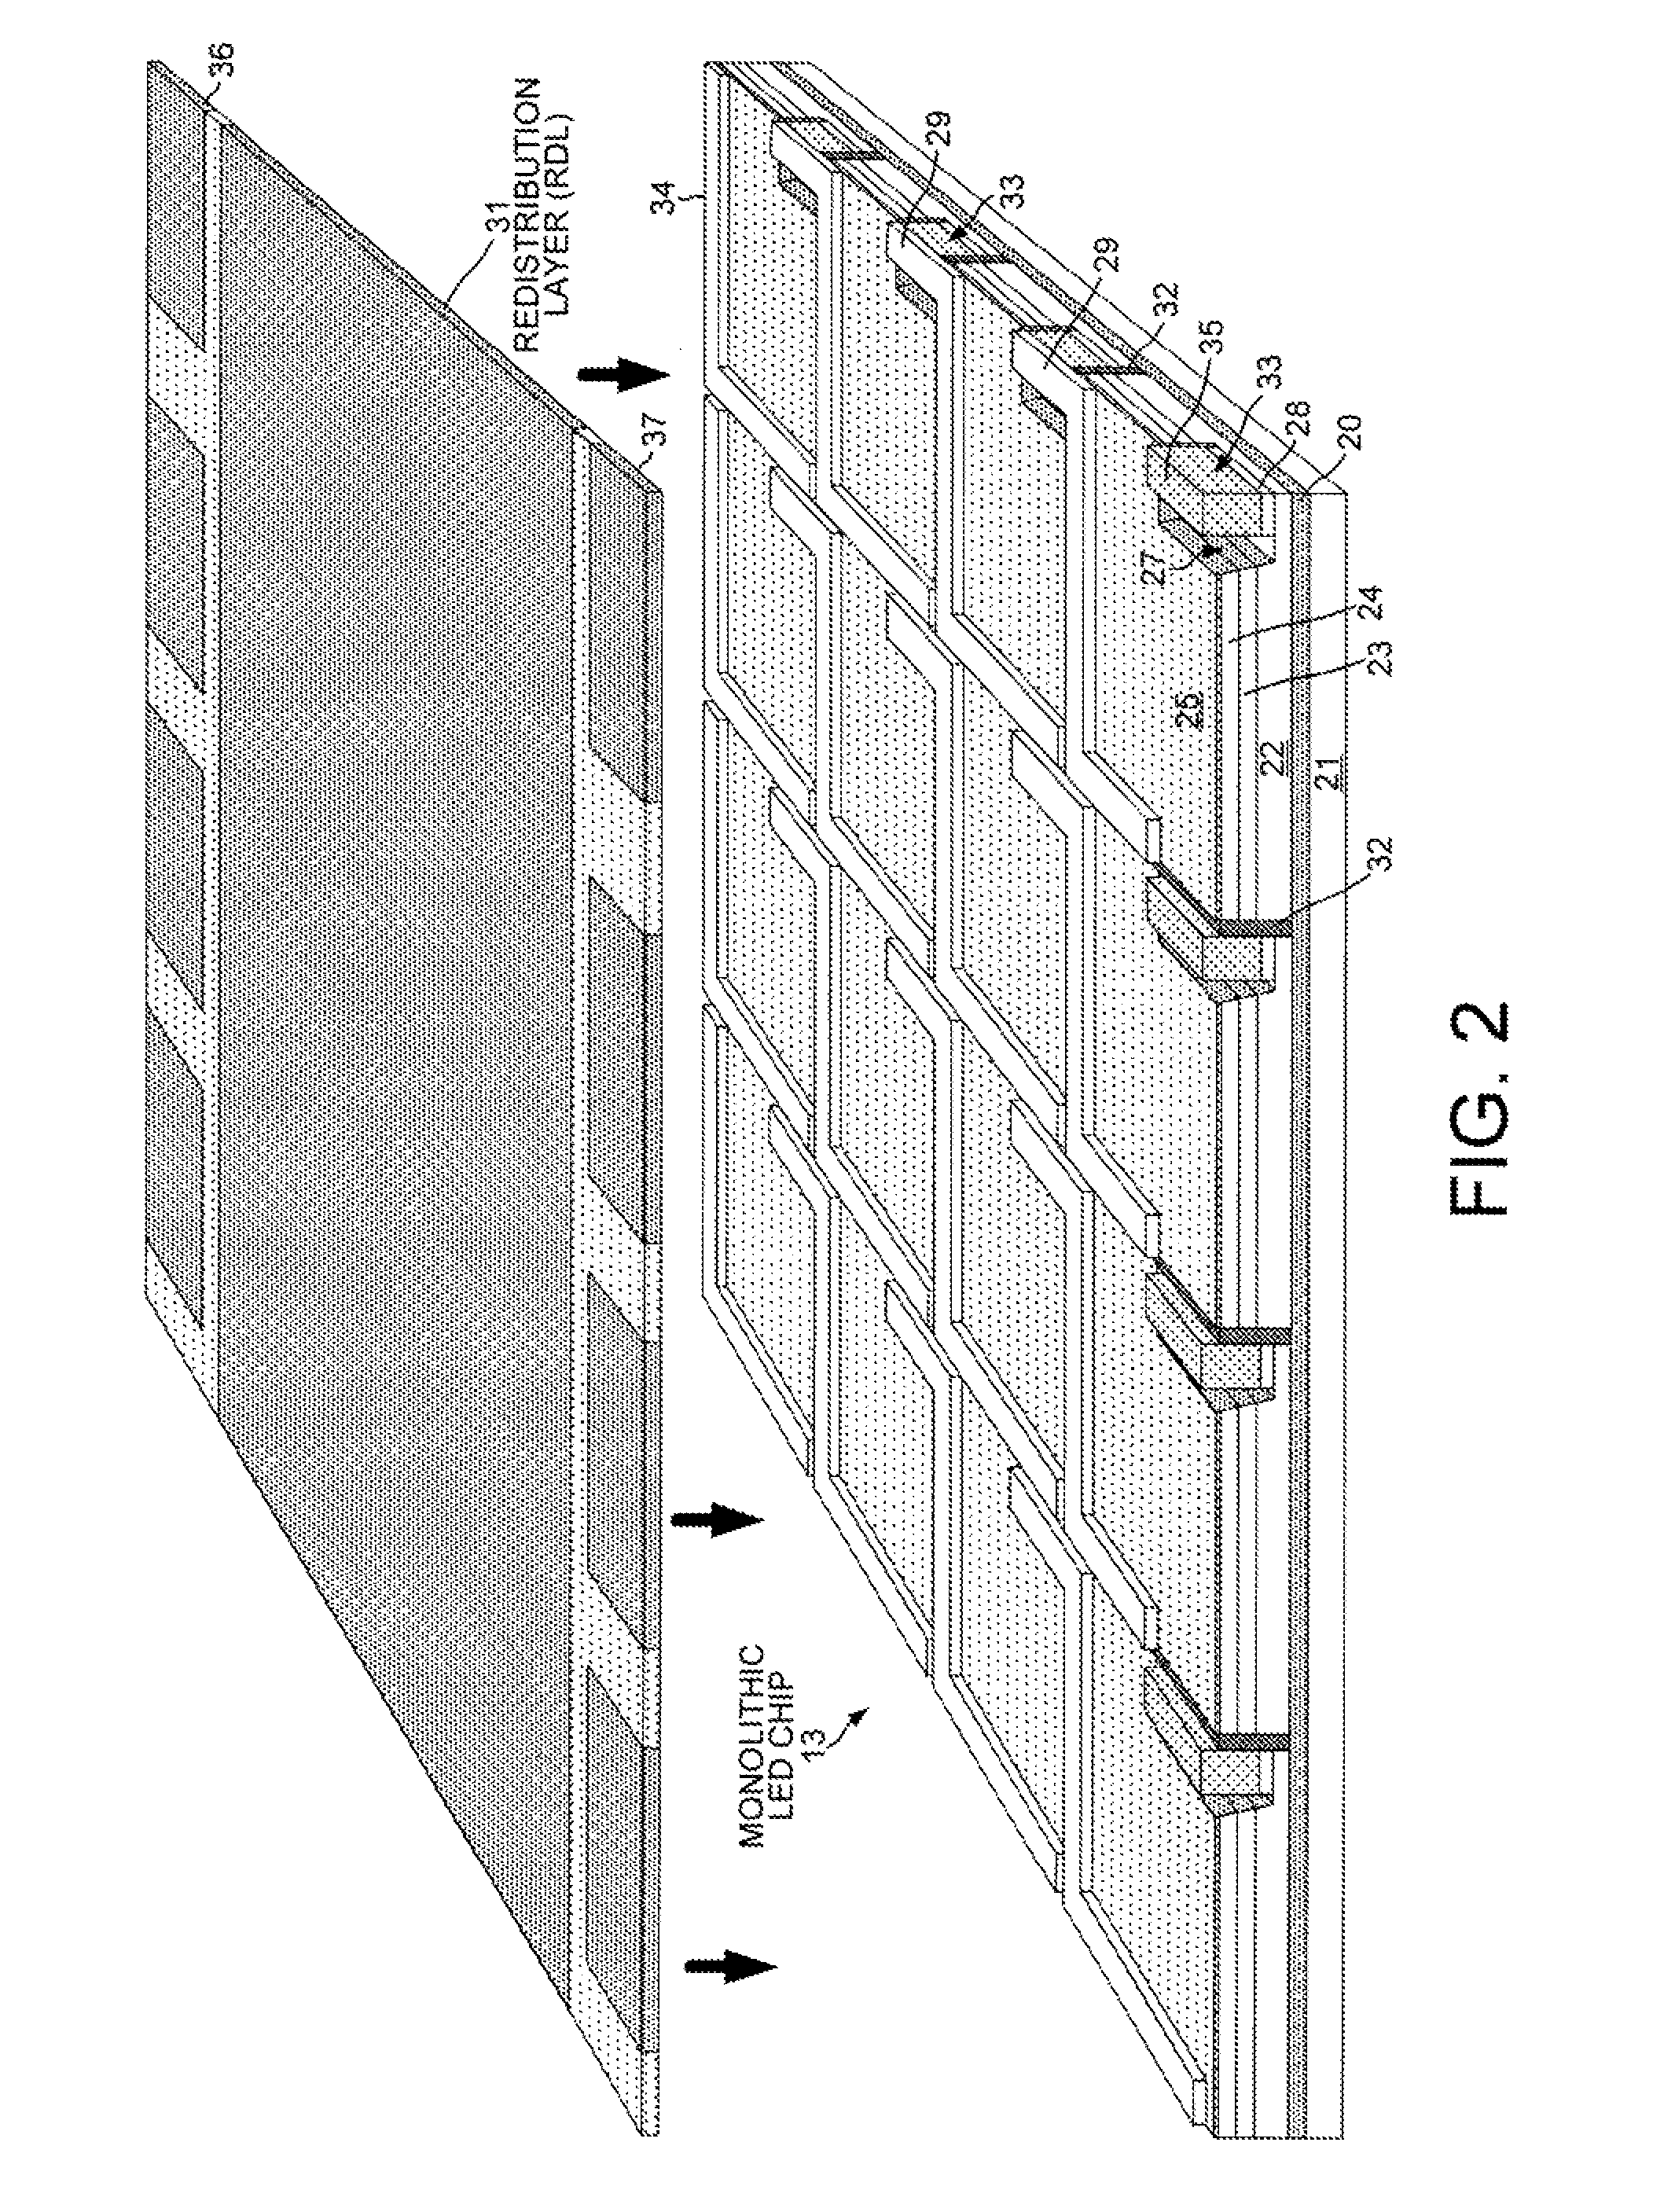 Monolithic LED chip in an integrated control module with active circuitry